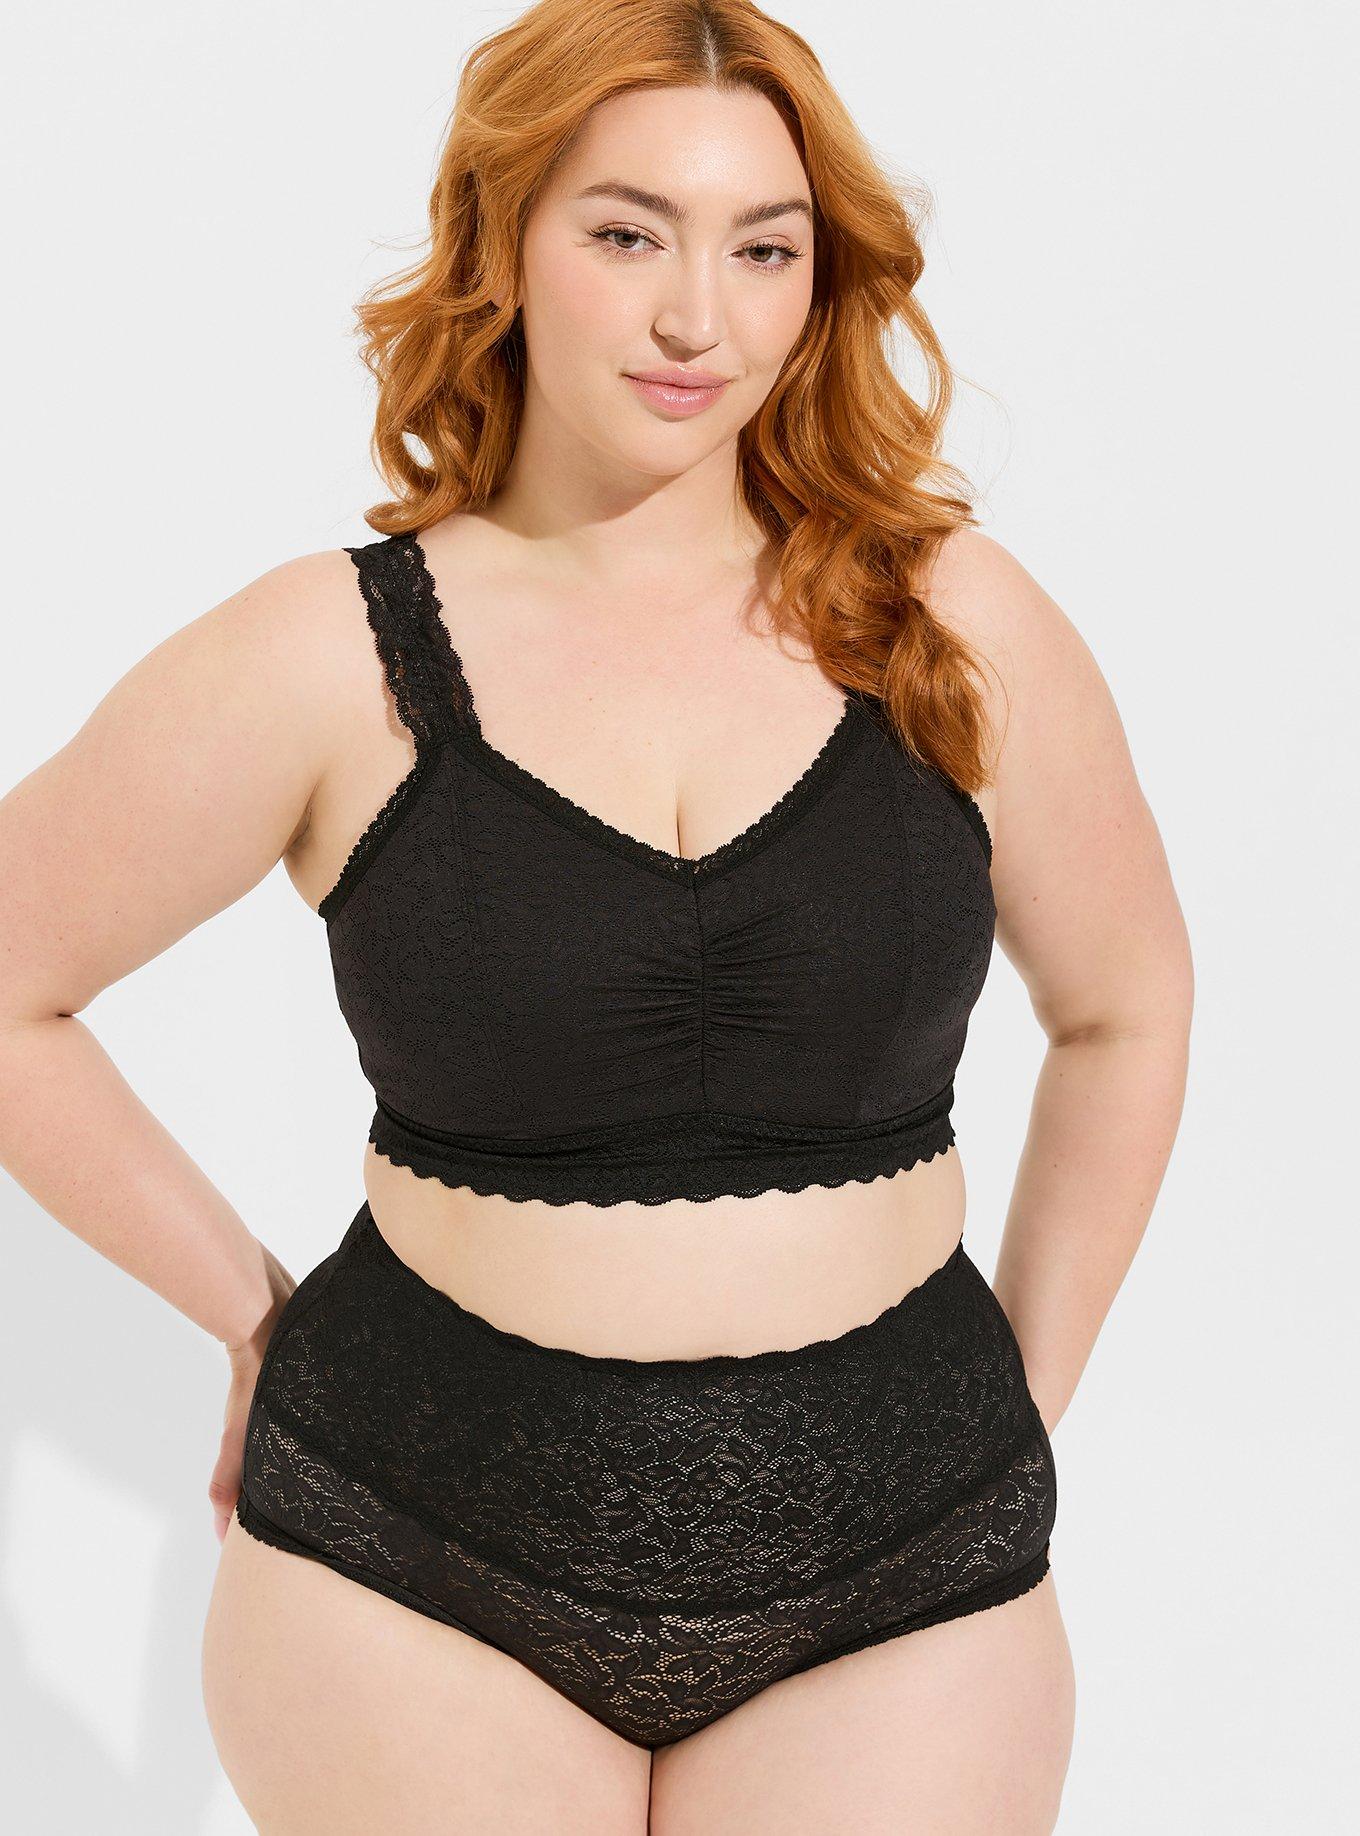 Plus Size - The Nightmare Before Christmas Scoop Neck Bralette - Cotton -  Torrid